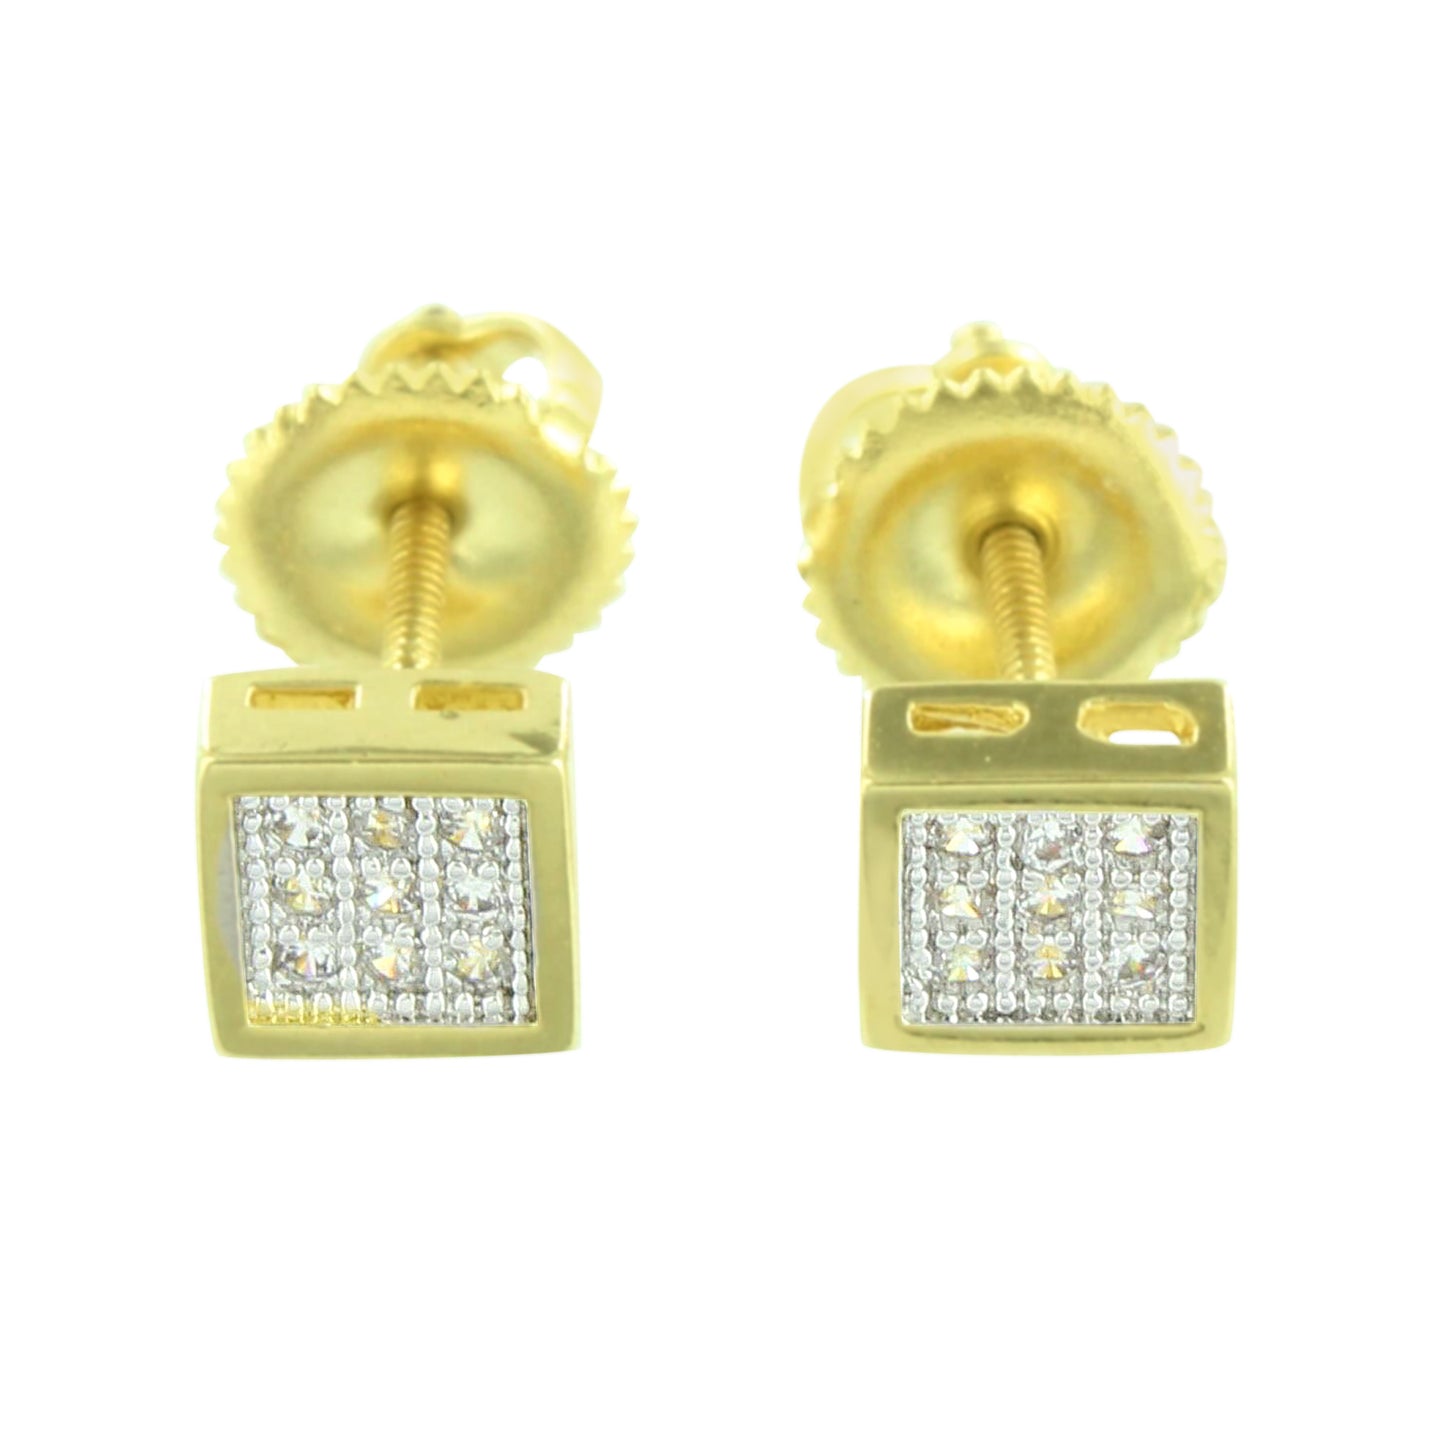 Square Earrings 5 MM Mens Womens Yellow Gold Finish